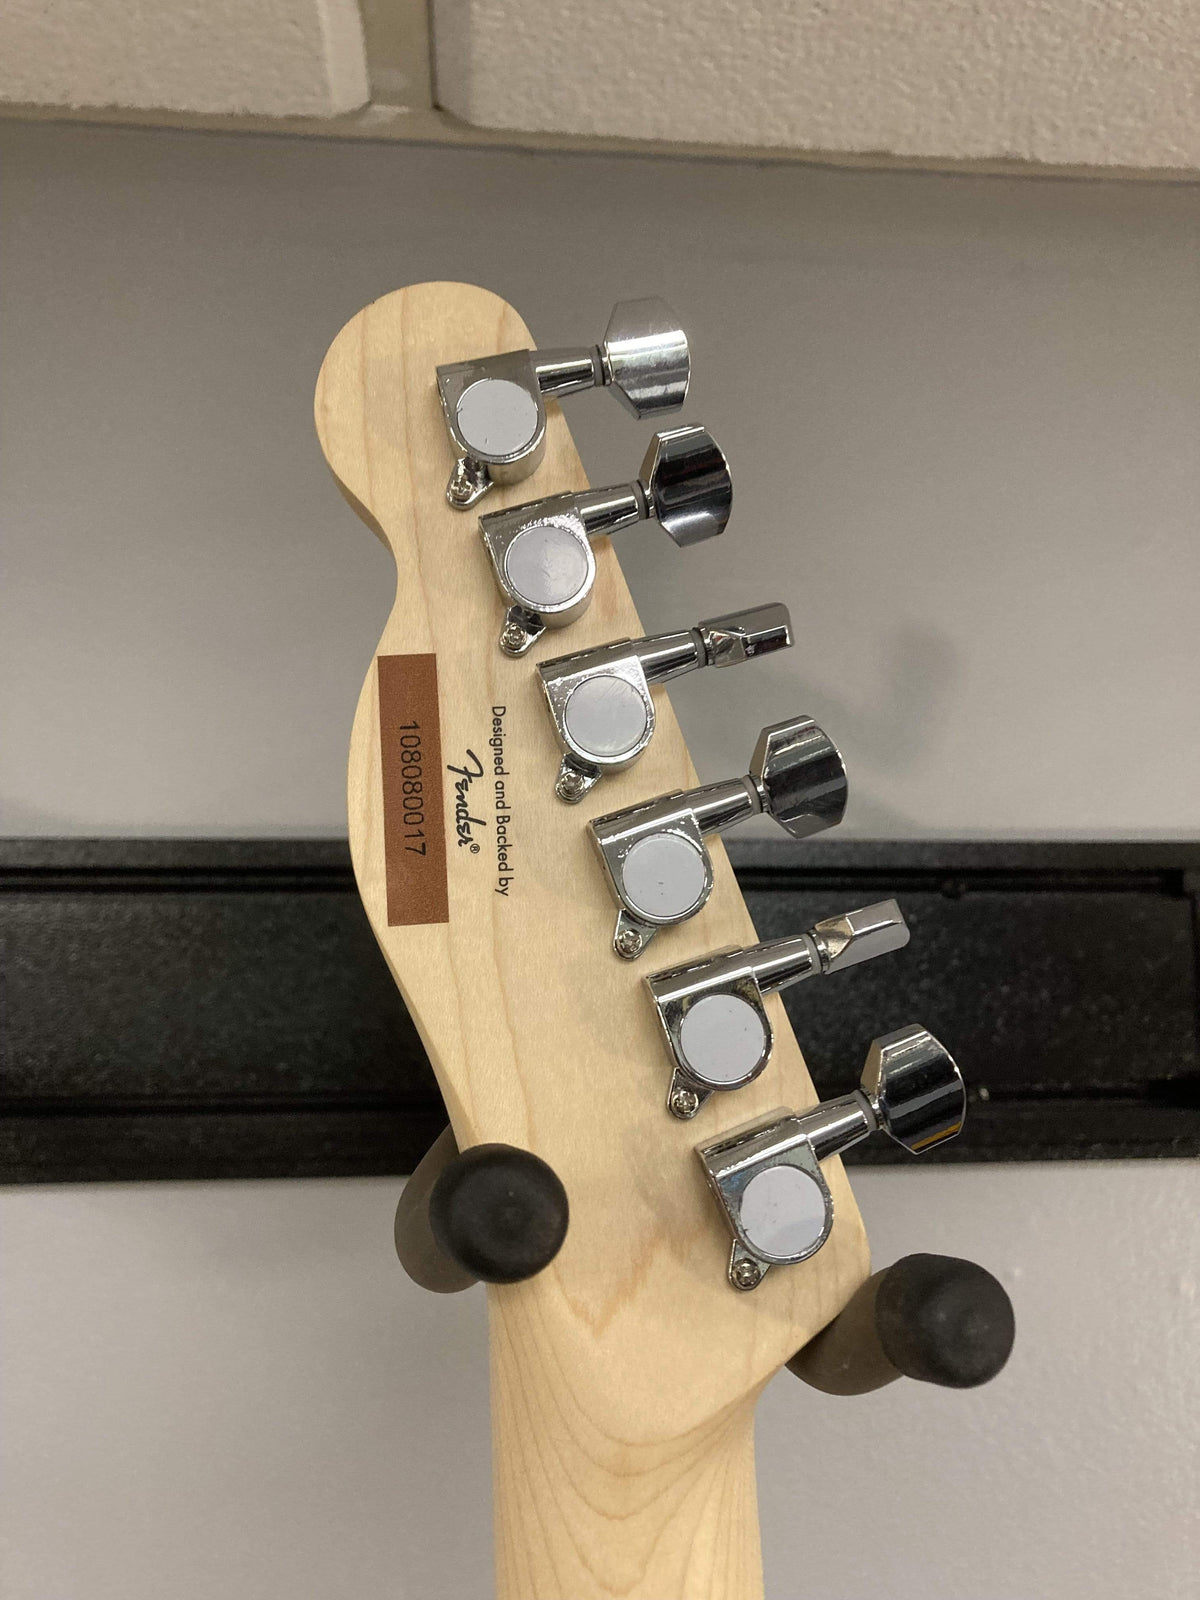 Squier Affinity Telecaster BSB